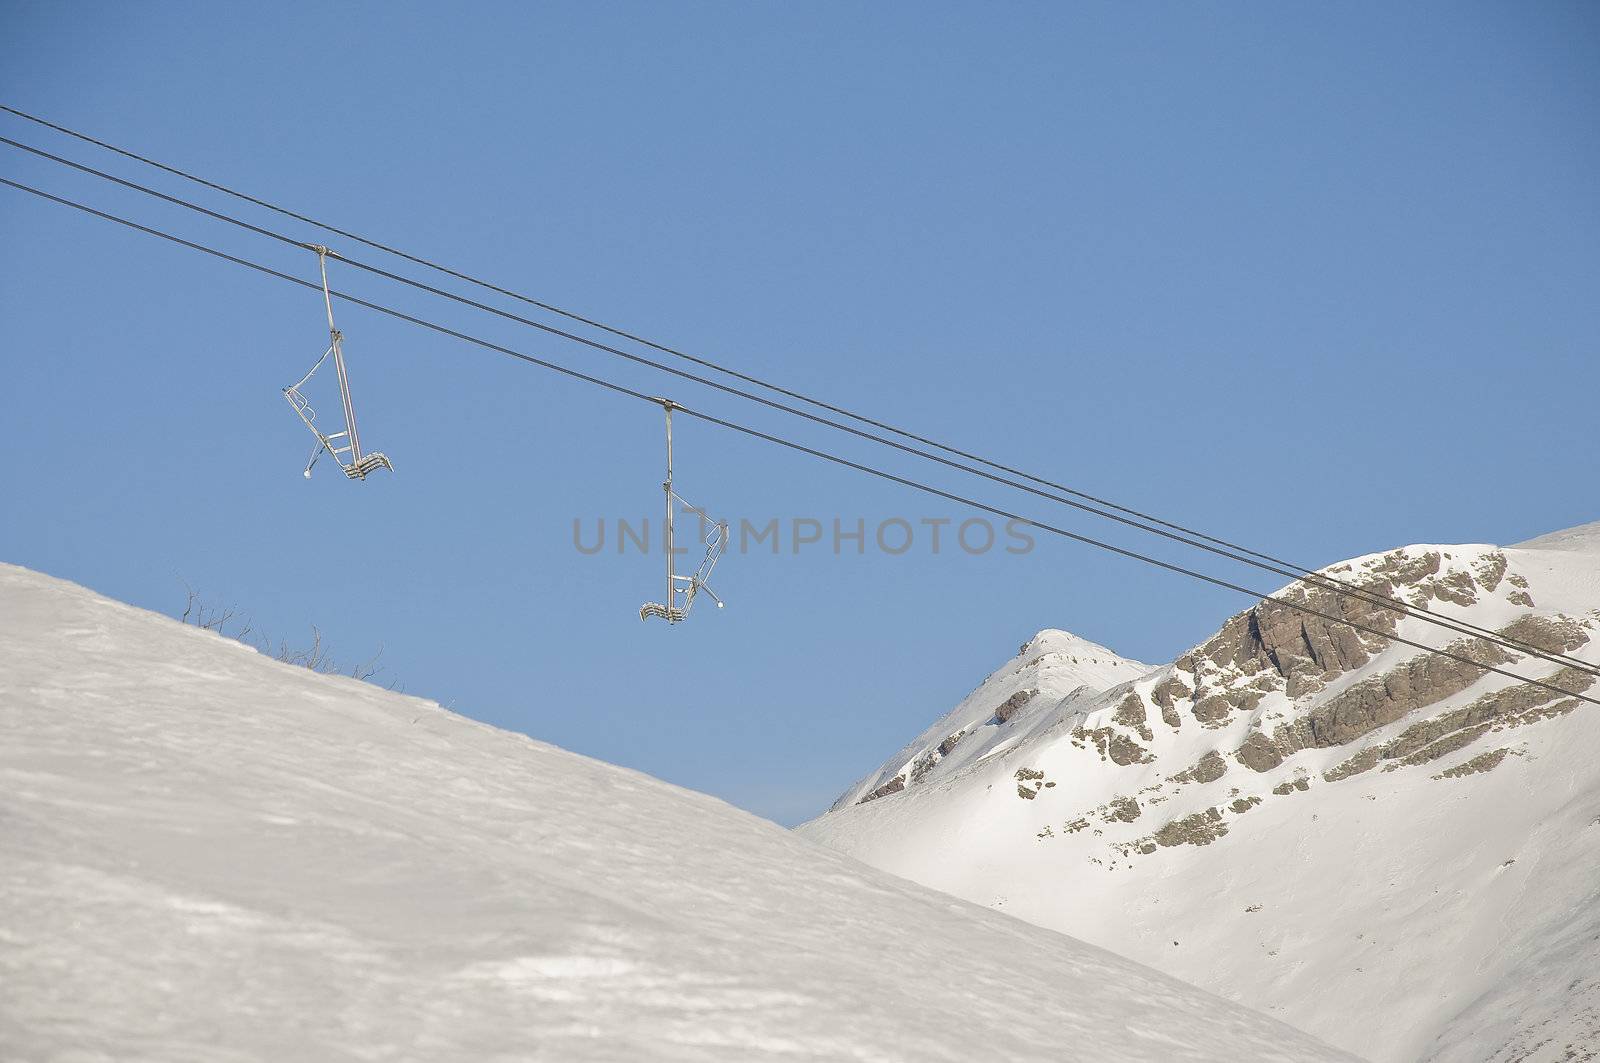 chair lift in the snow by sognolucido